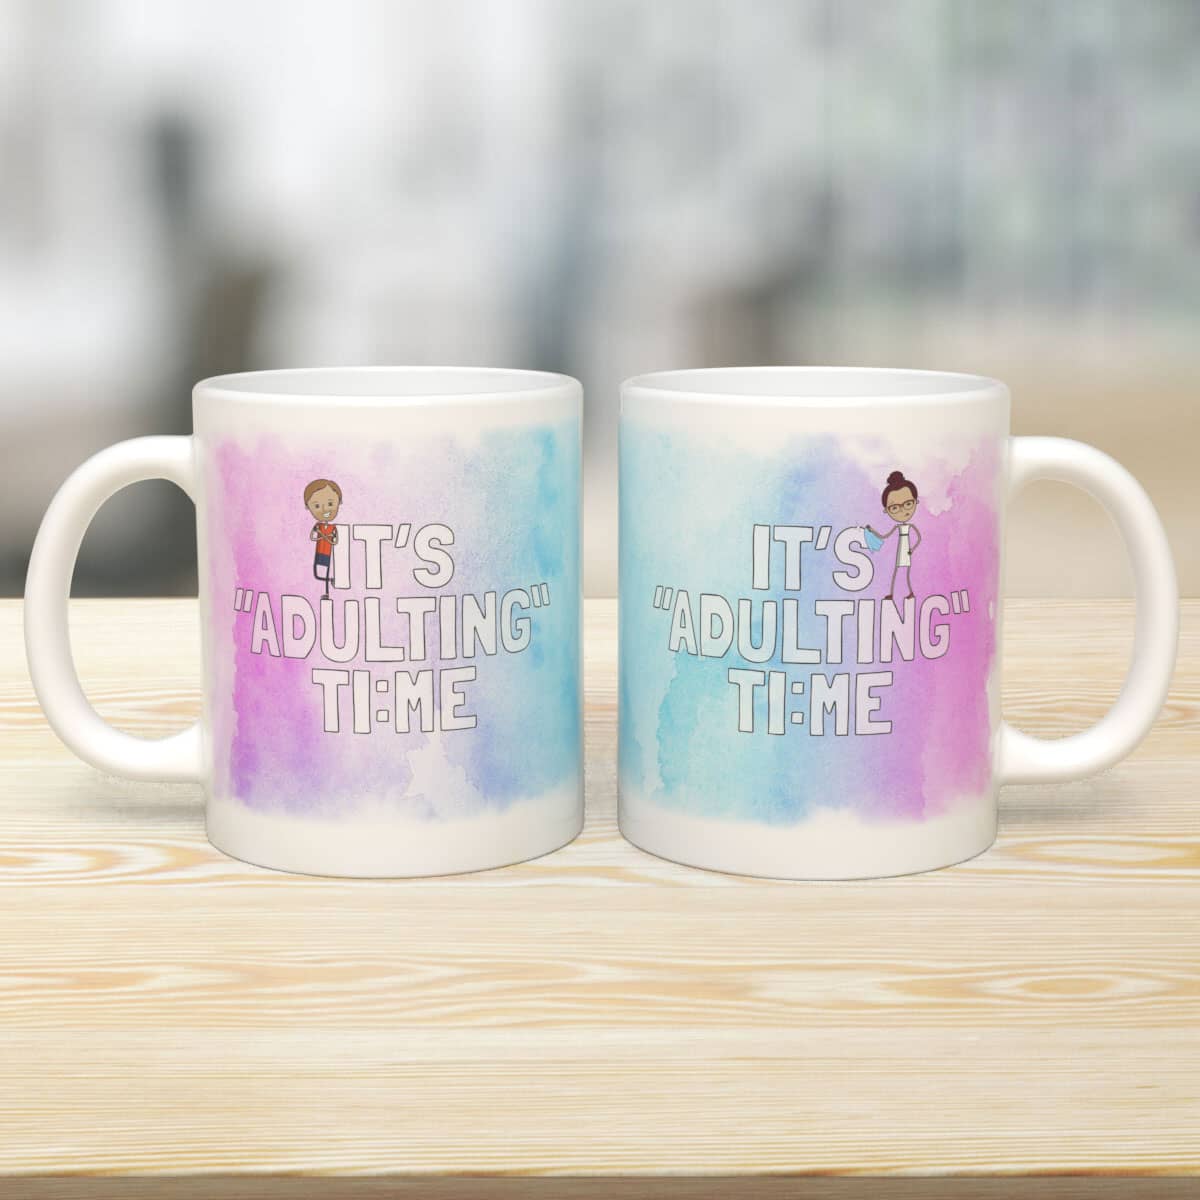 It's Adulting Time - Set of 2 Mugs